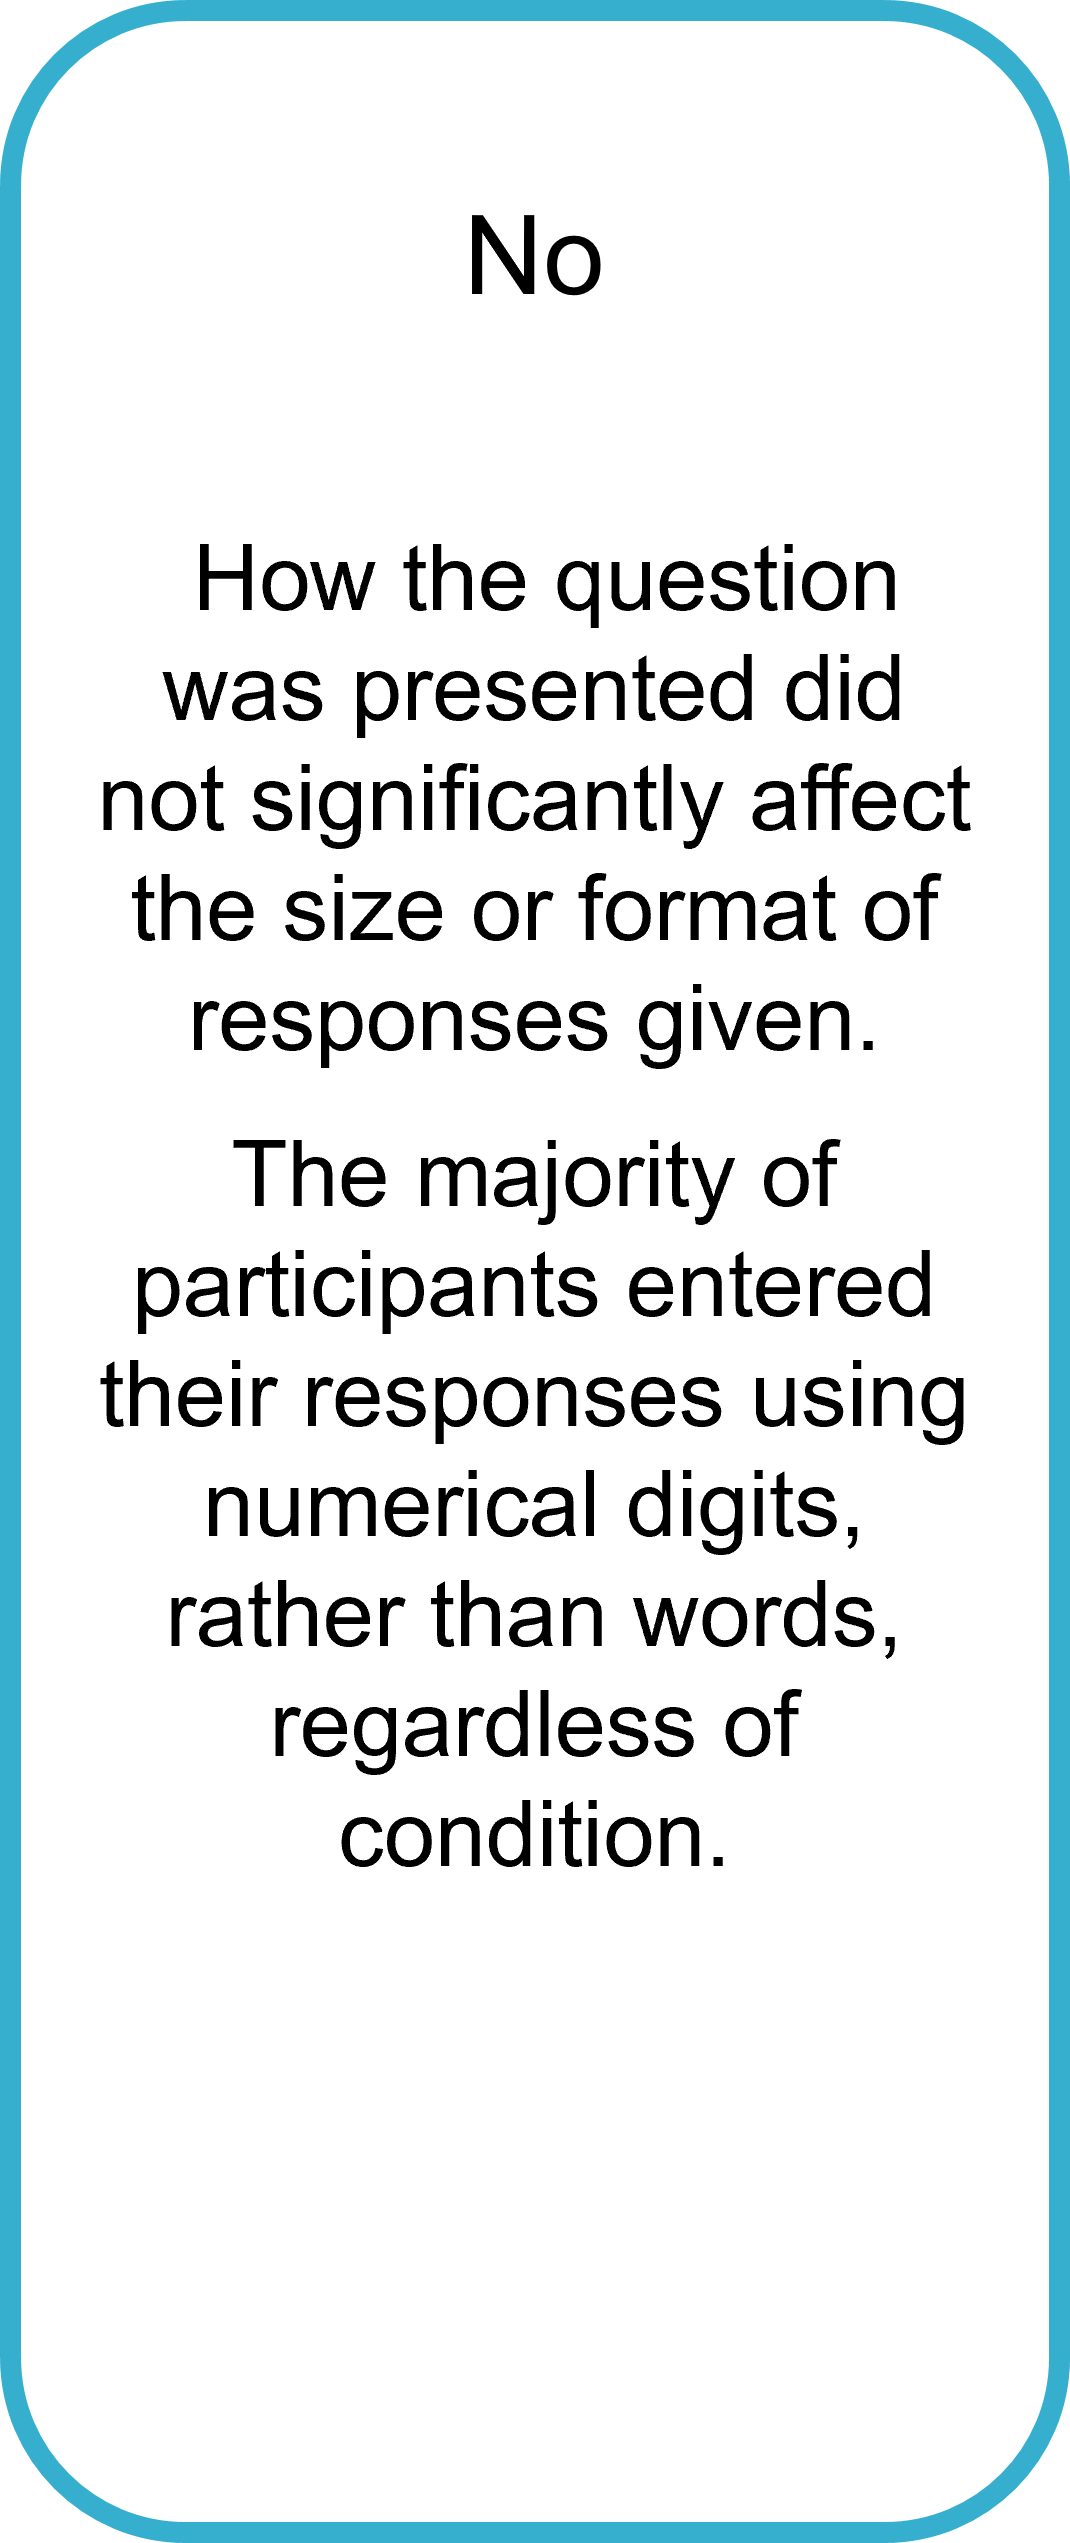 3. Does writing the question boundaries using words or digits affect responses? No   How the question was presented did not significantly affect the size or format of responses given. The majority of participants entered their responses using numerical digits, rather than words, regardless of condition.